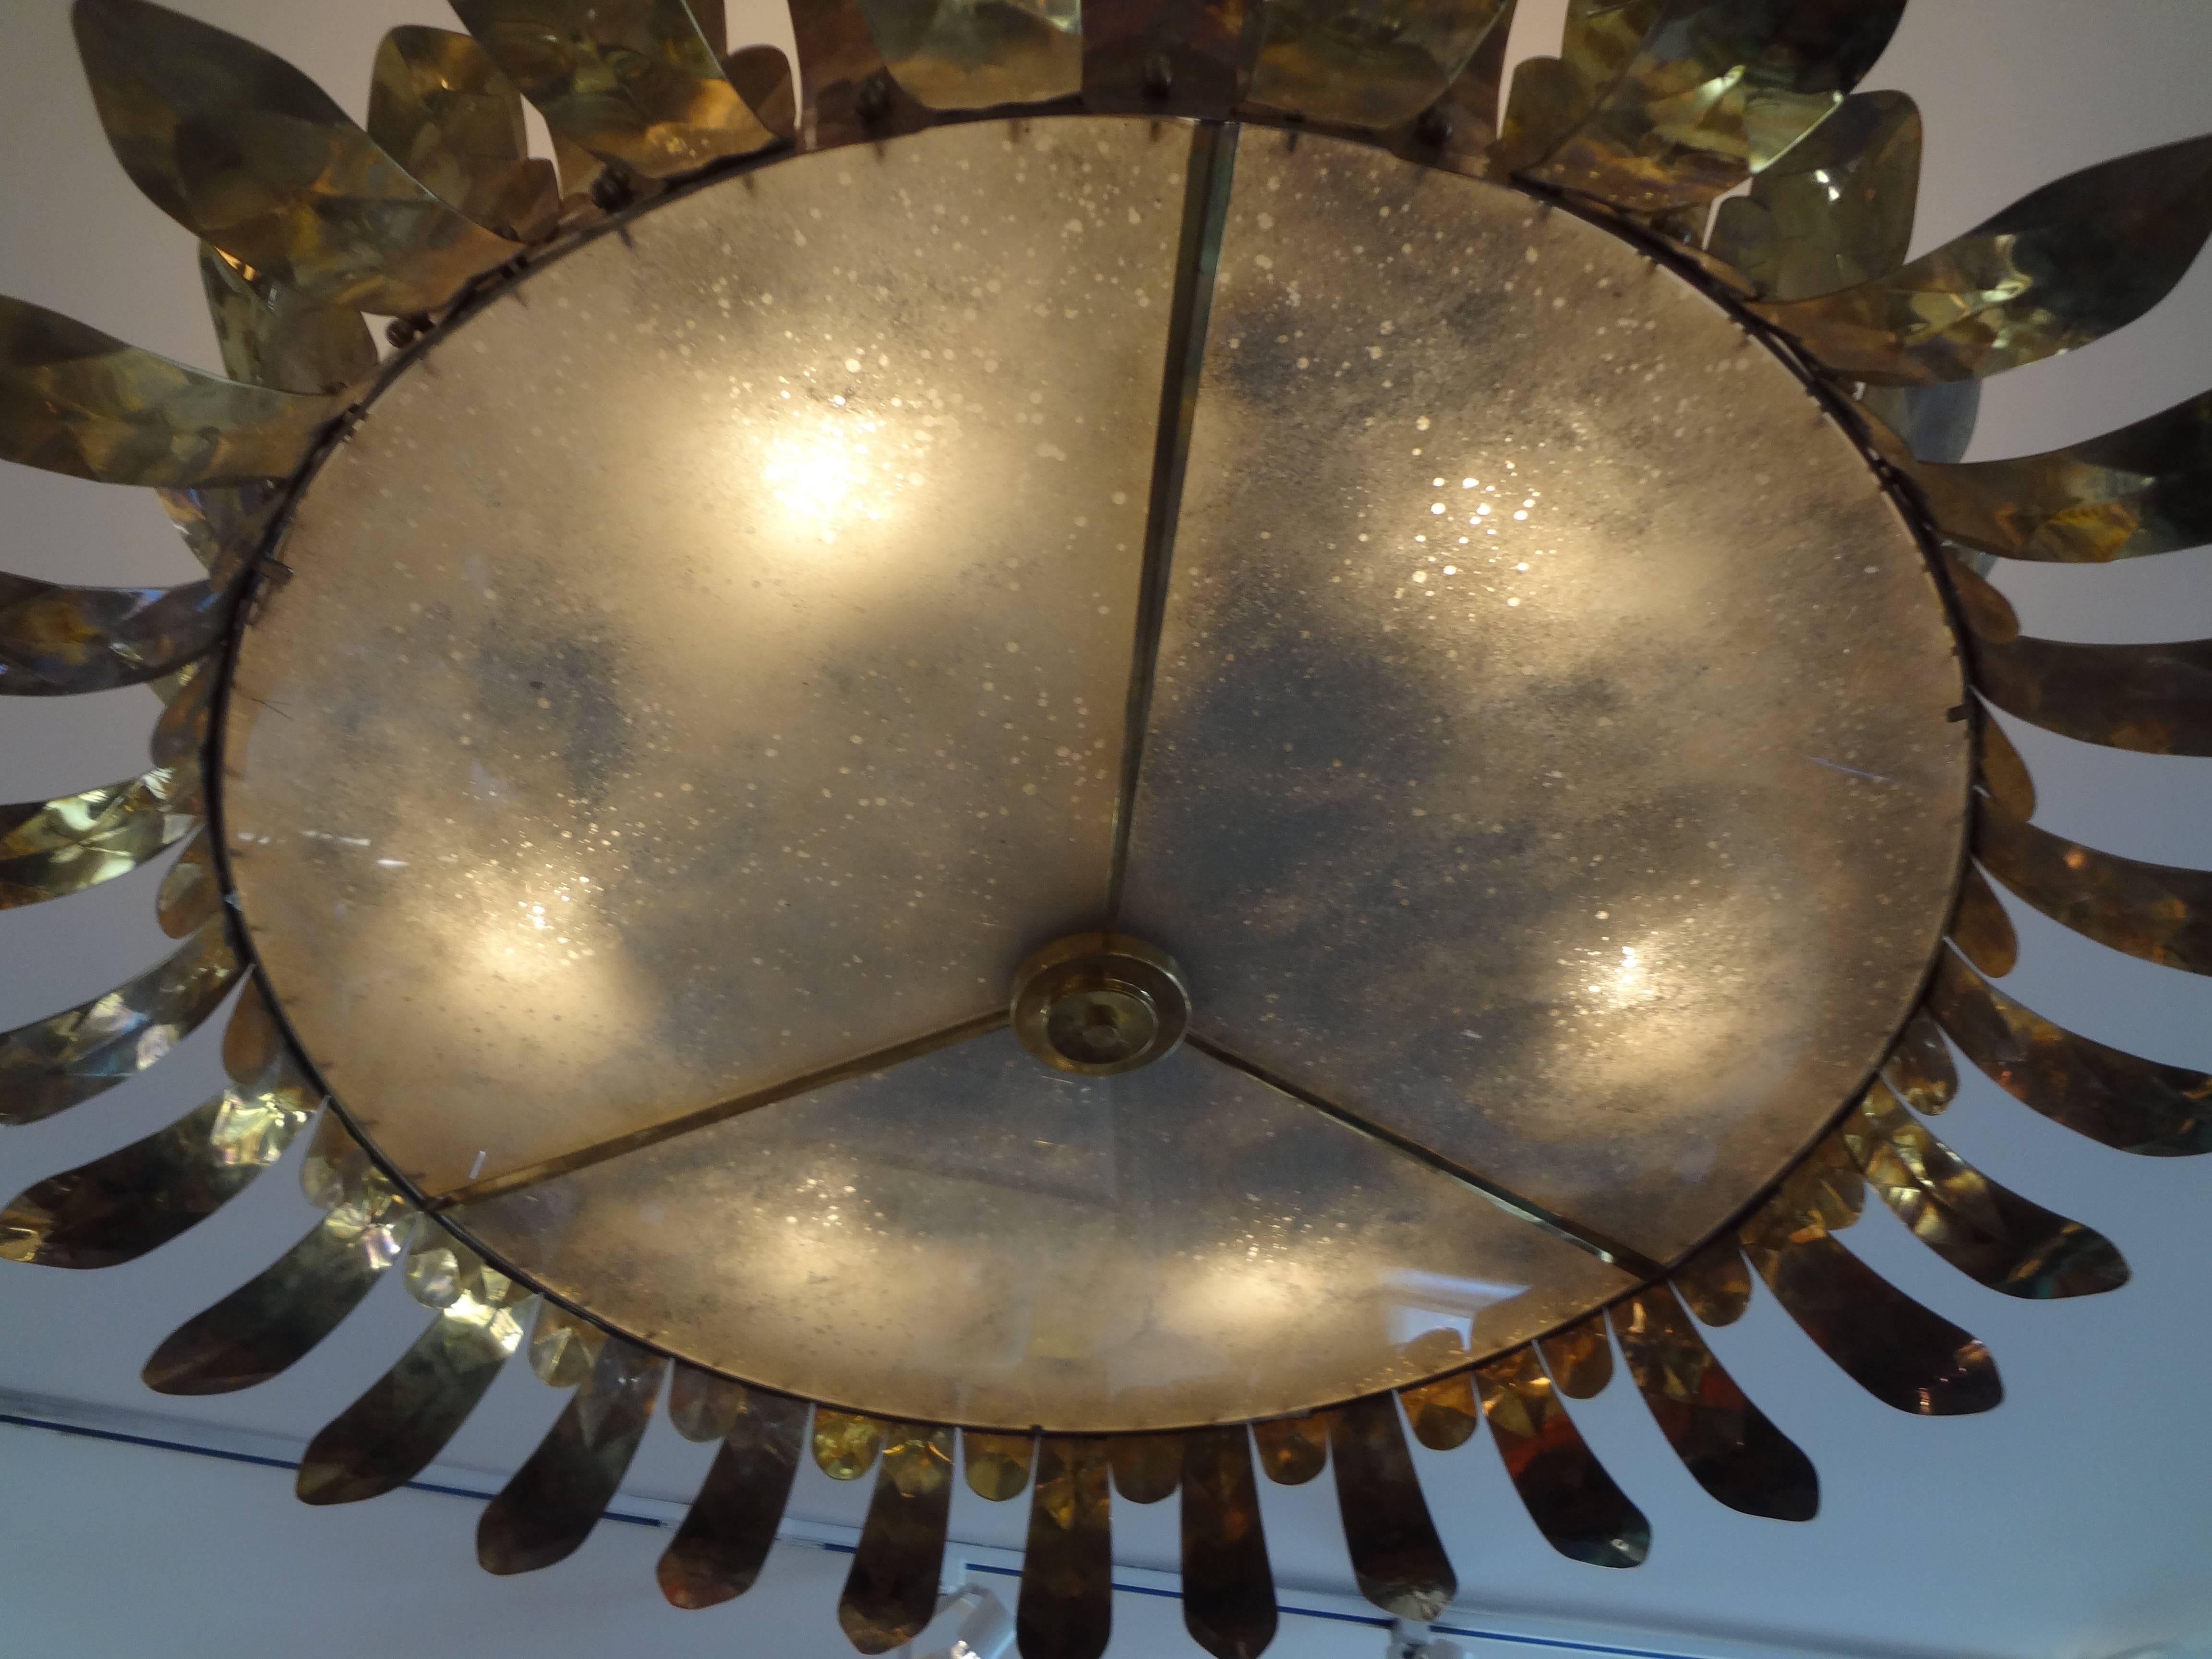 Large Italian Mid-Century Modern Art Deco style hand-hammered brass and glass chandelier that can be flush mounted or hung from a chain at any height 40 inches in diameter. Newly wired for U.S. Market.
36 inch heavy duty brass chain included.